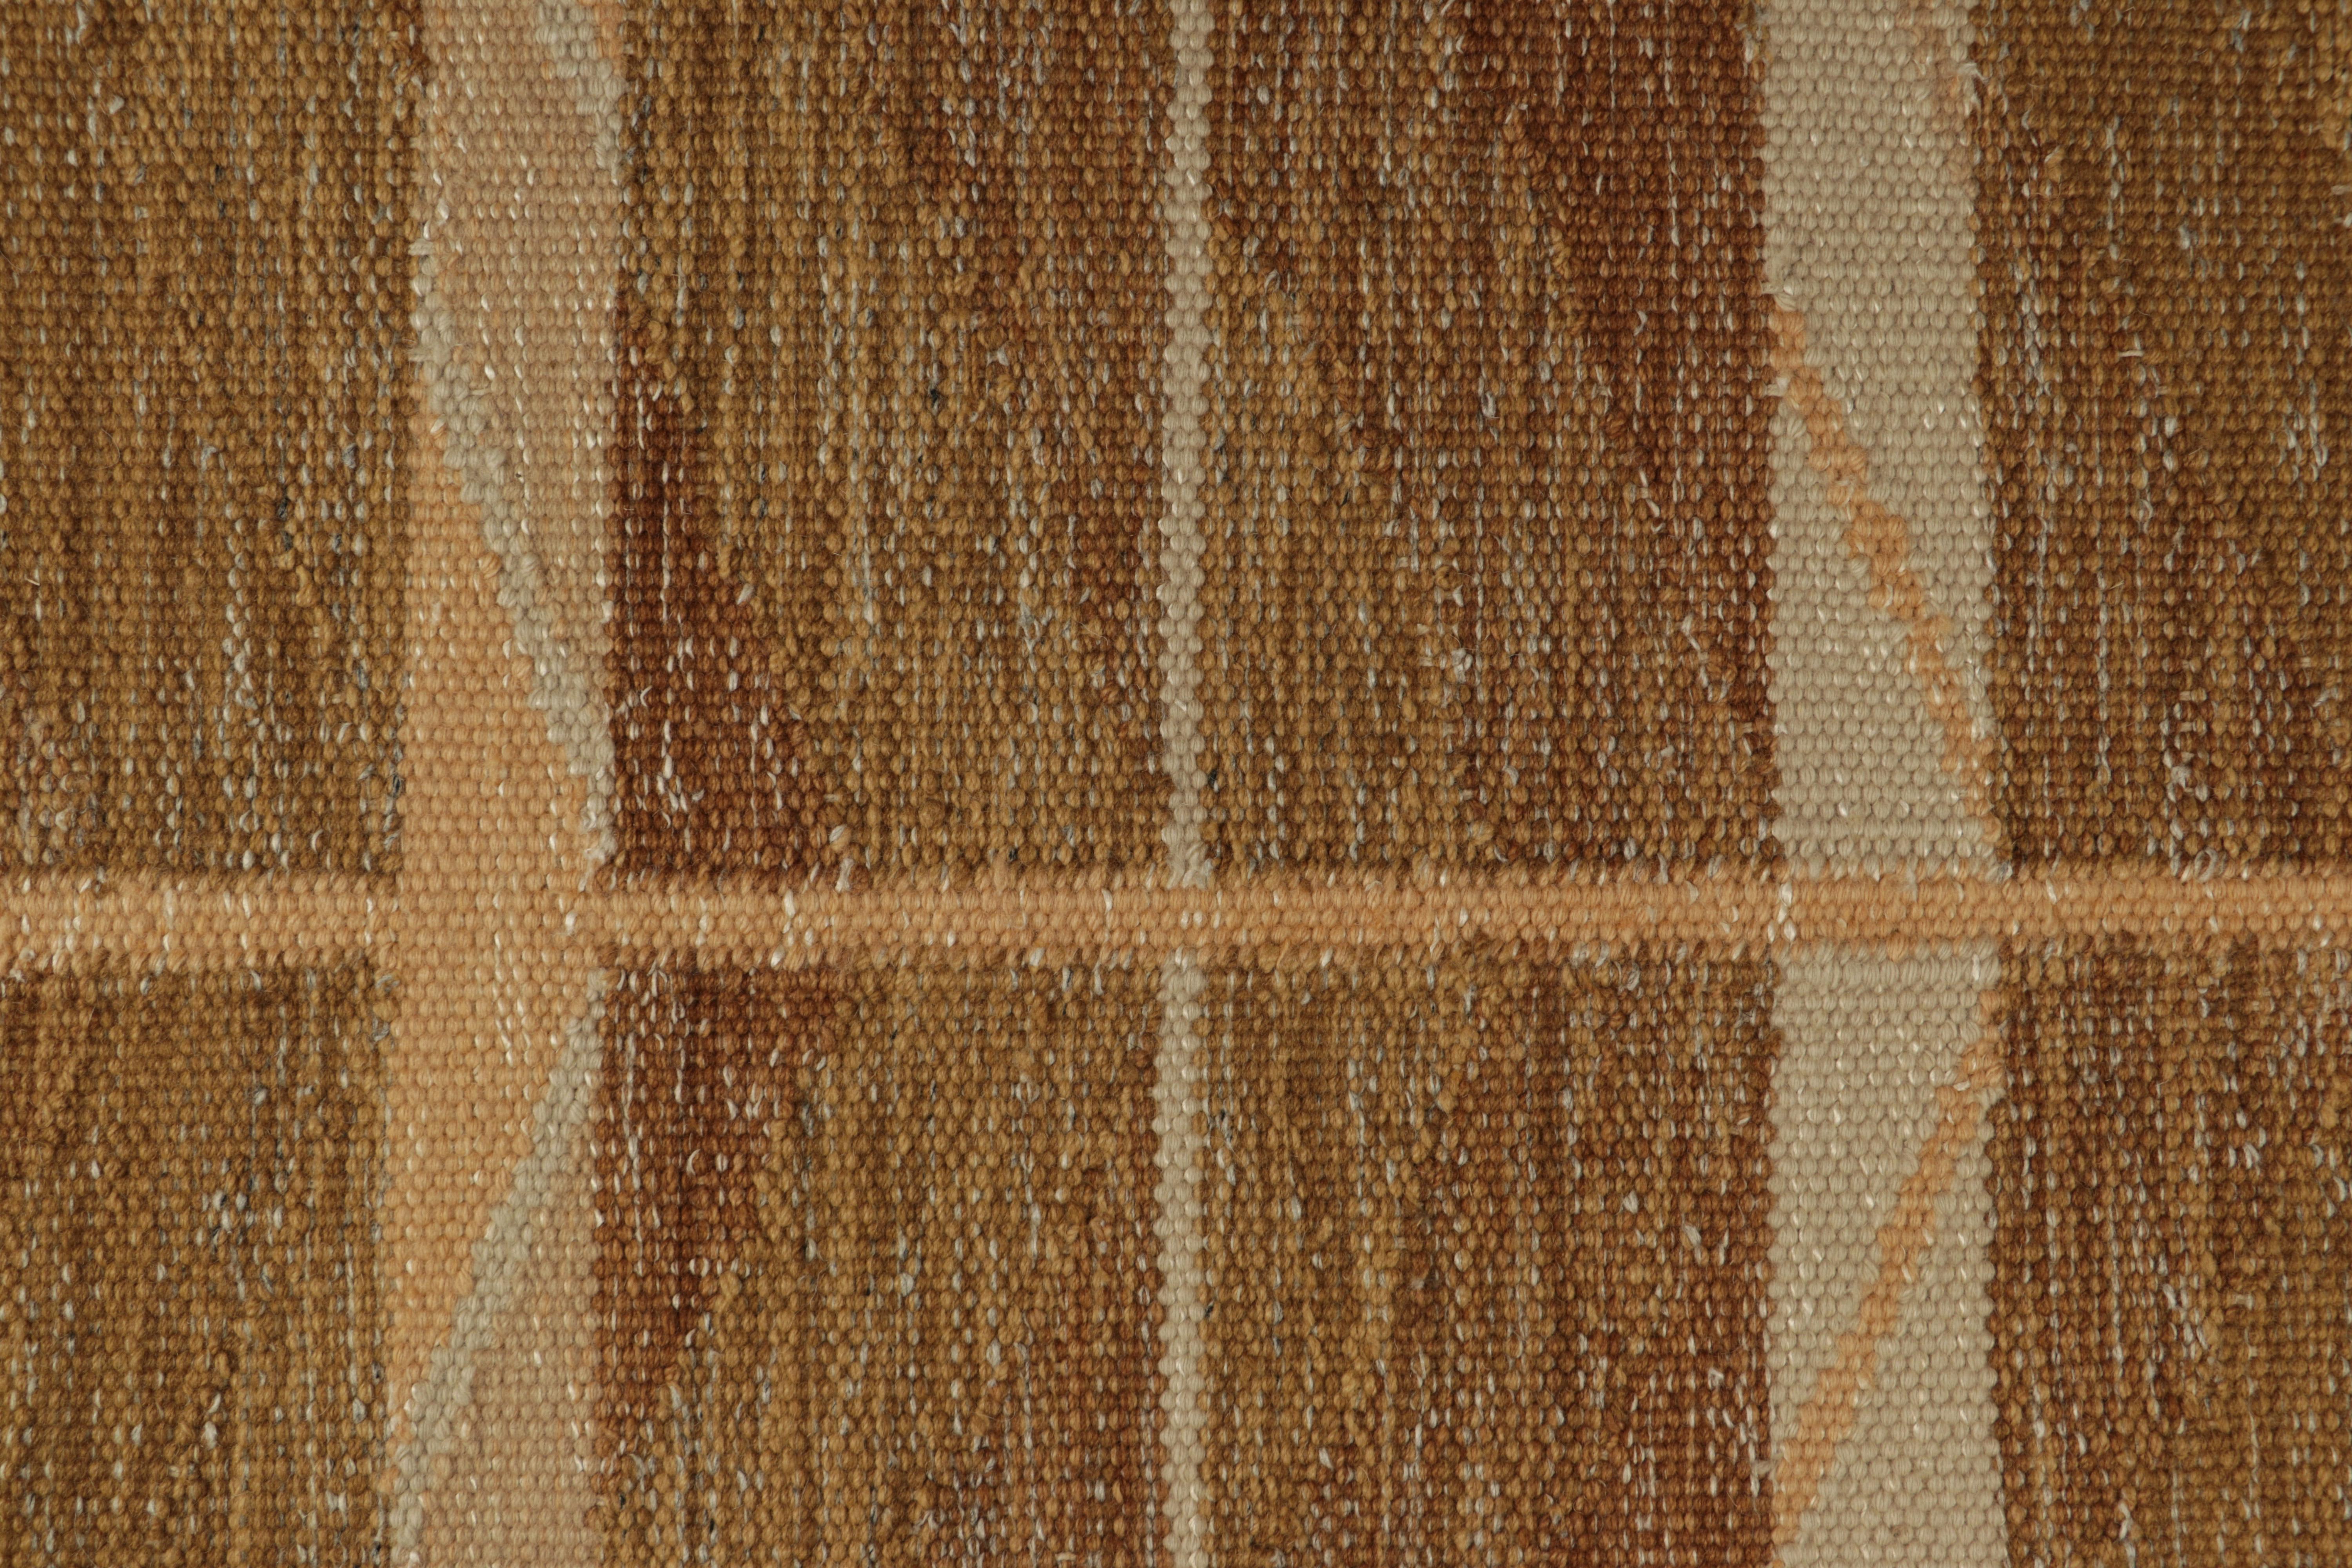 Hand-Woven Rug & Kilim’s Scandinavian Style Rug in Beige-Brown, with Geometric Patterns For Sale